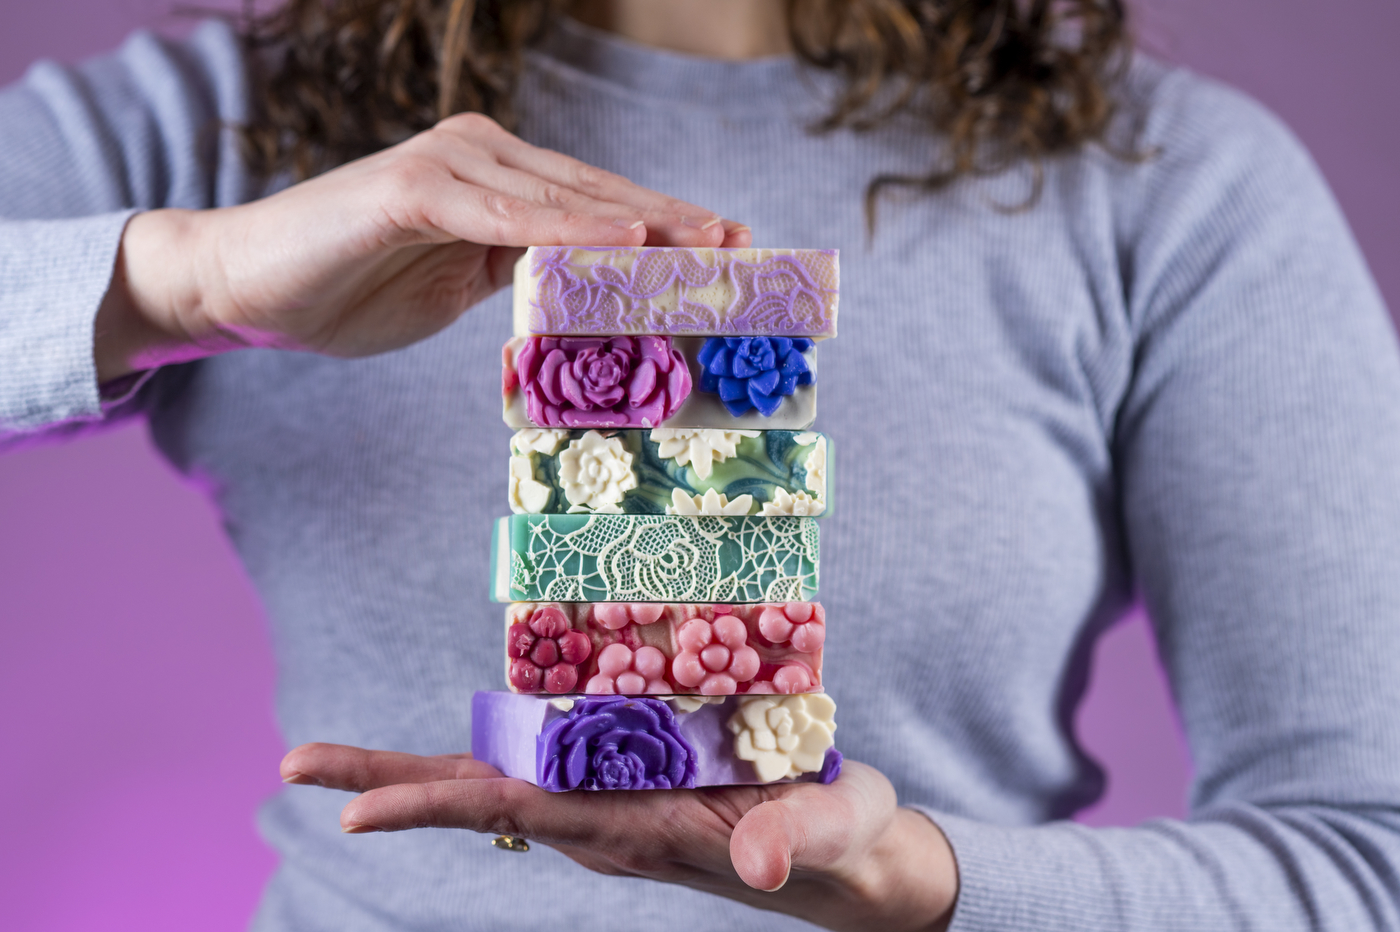 Tori Farley holding a stack of handmade soaps.